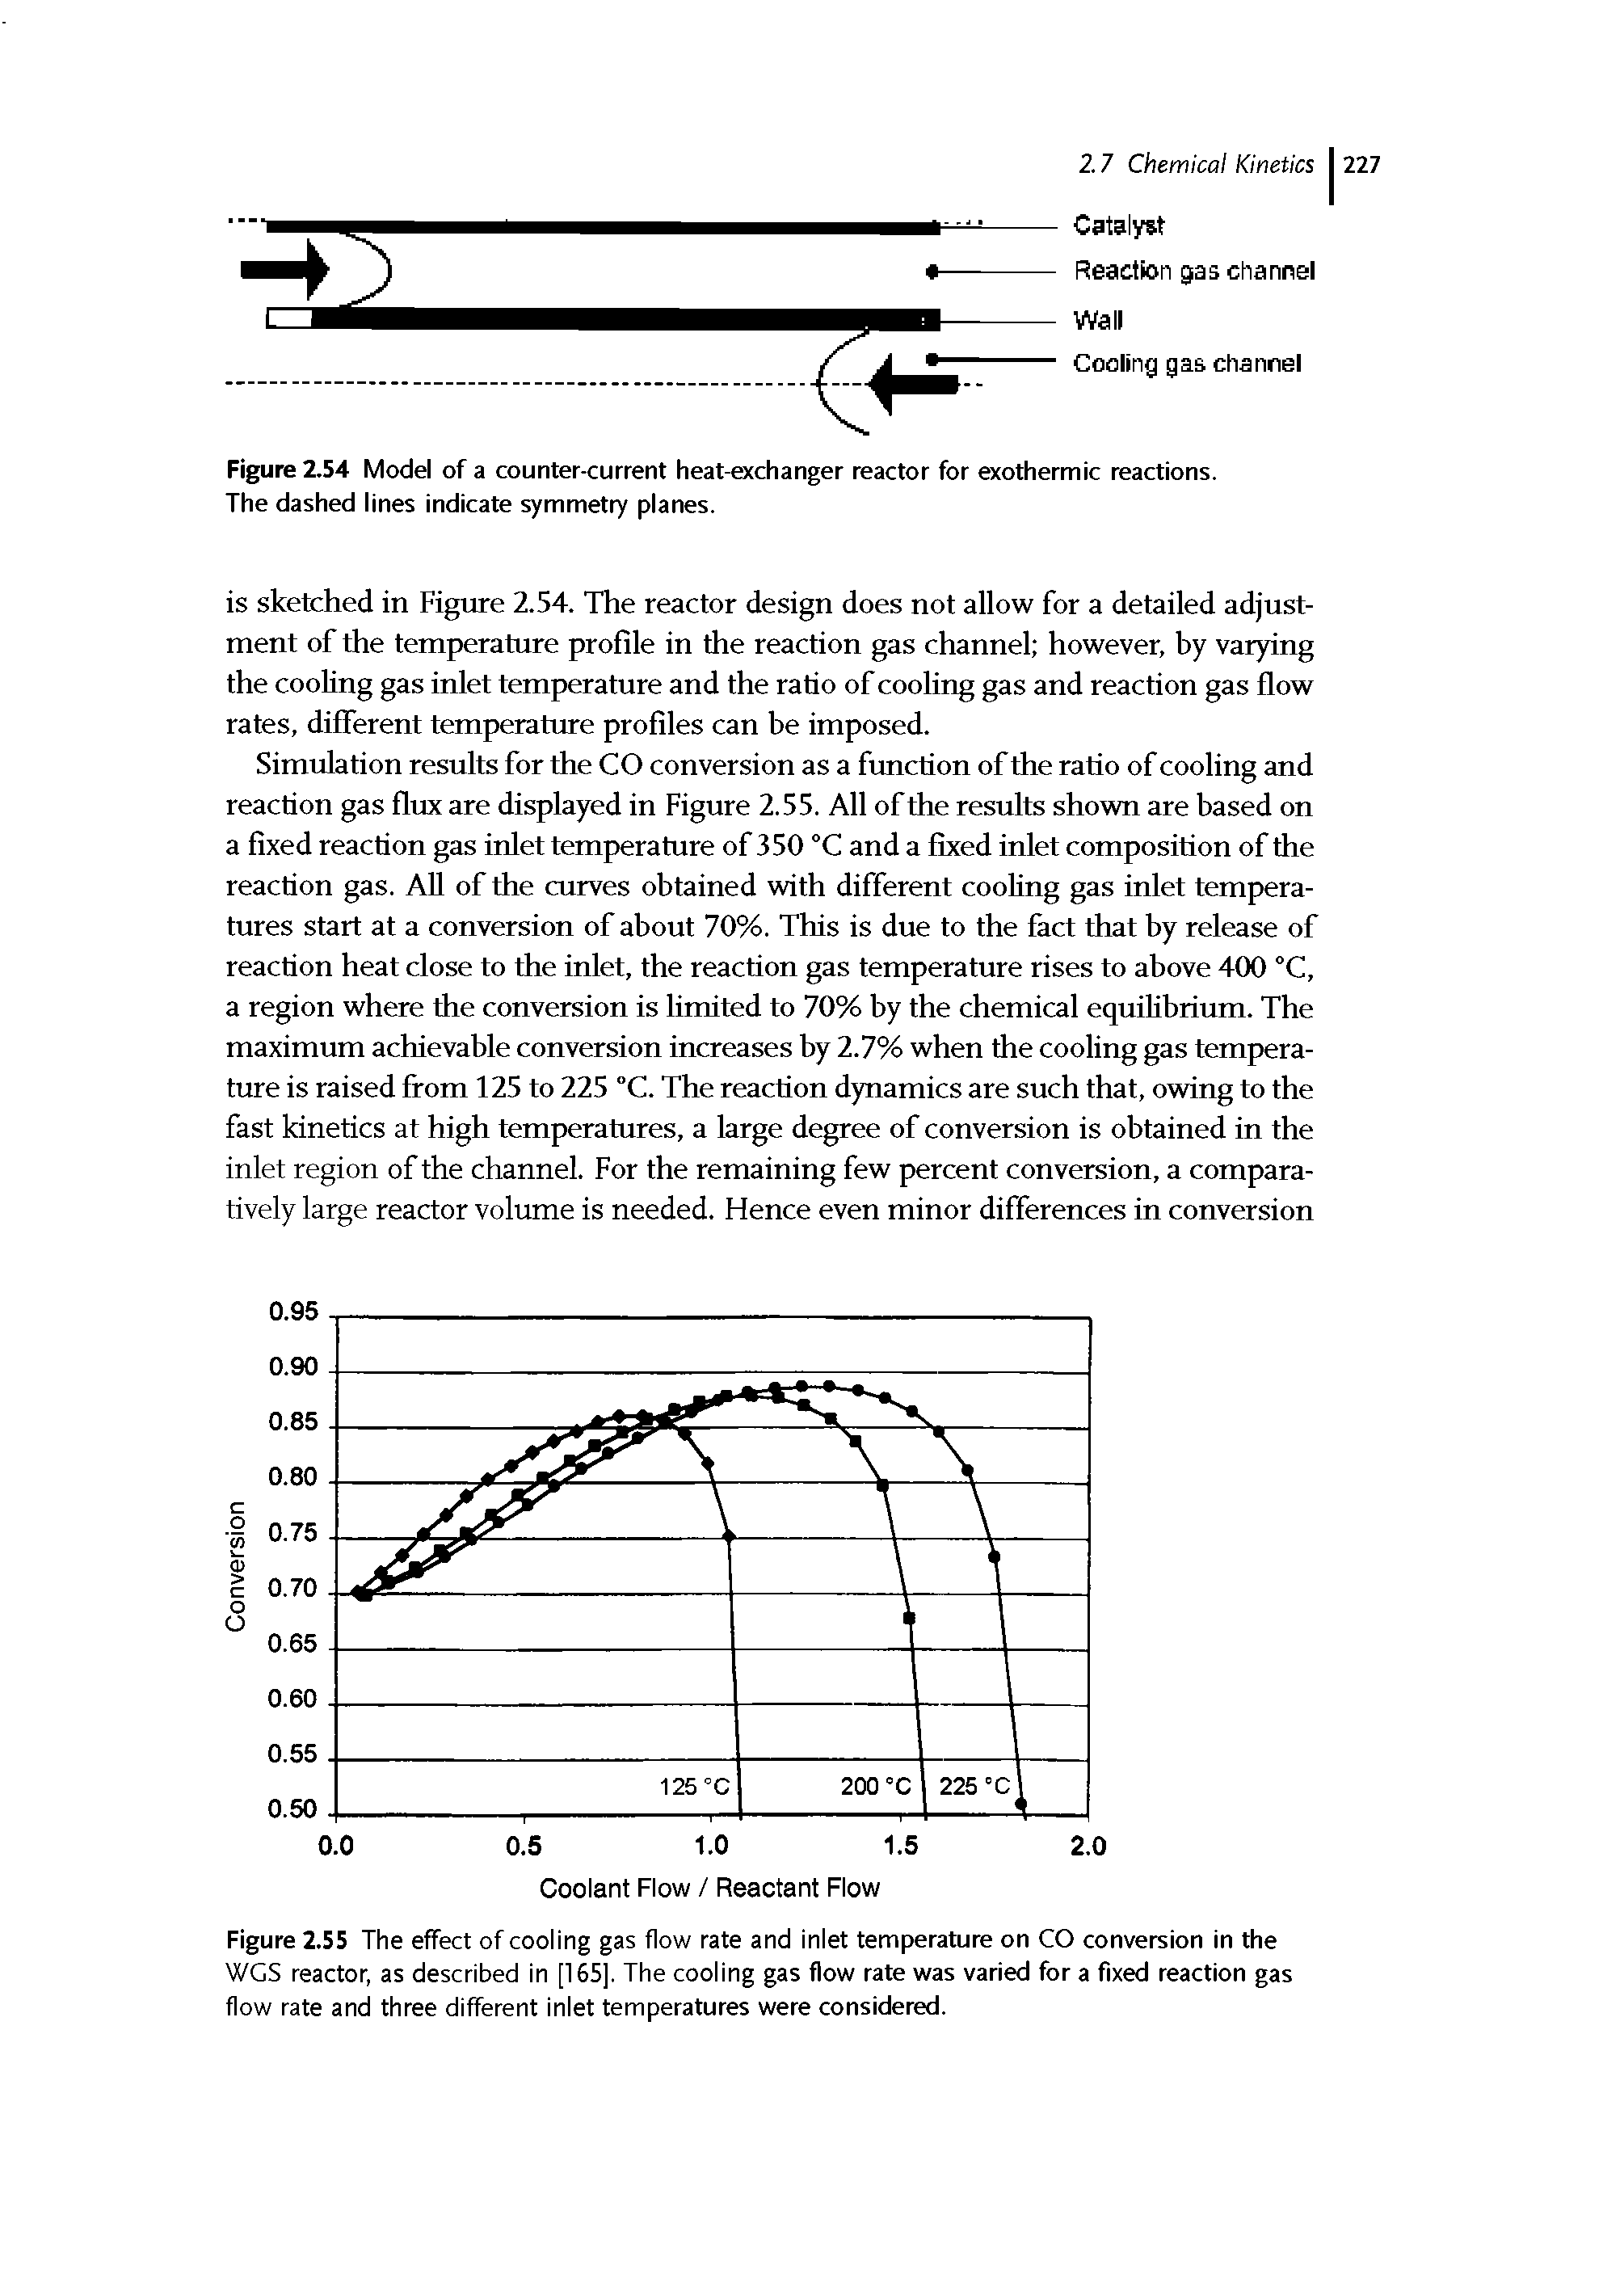 Figure 2.55 The effect of cooling gas flow rate and inlet temperature on CO conversion in the WGS reactor, as described in [165]. The cooling gas flow rate was varied for a fixed reaction gas flow rate and three different inlet temperatures were considered.